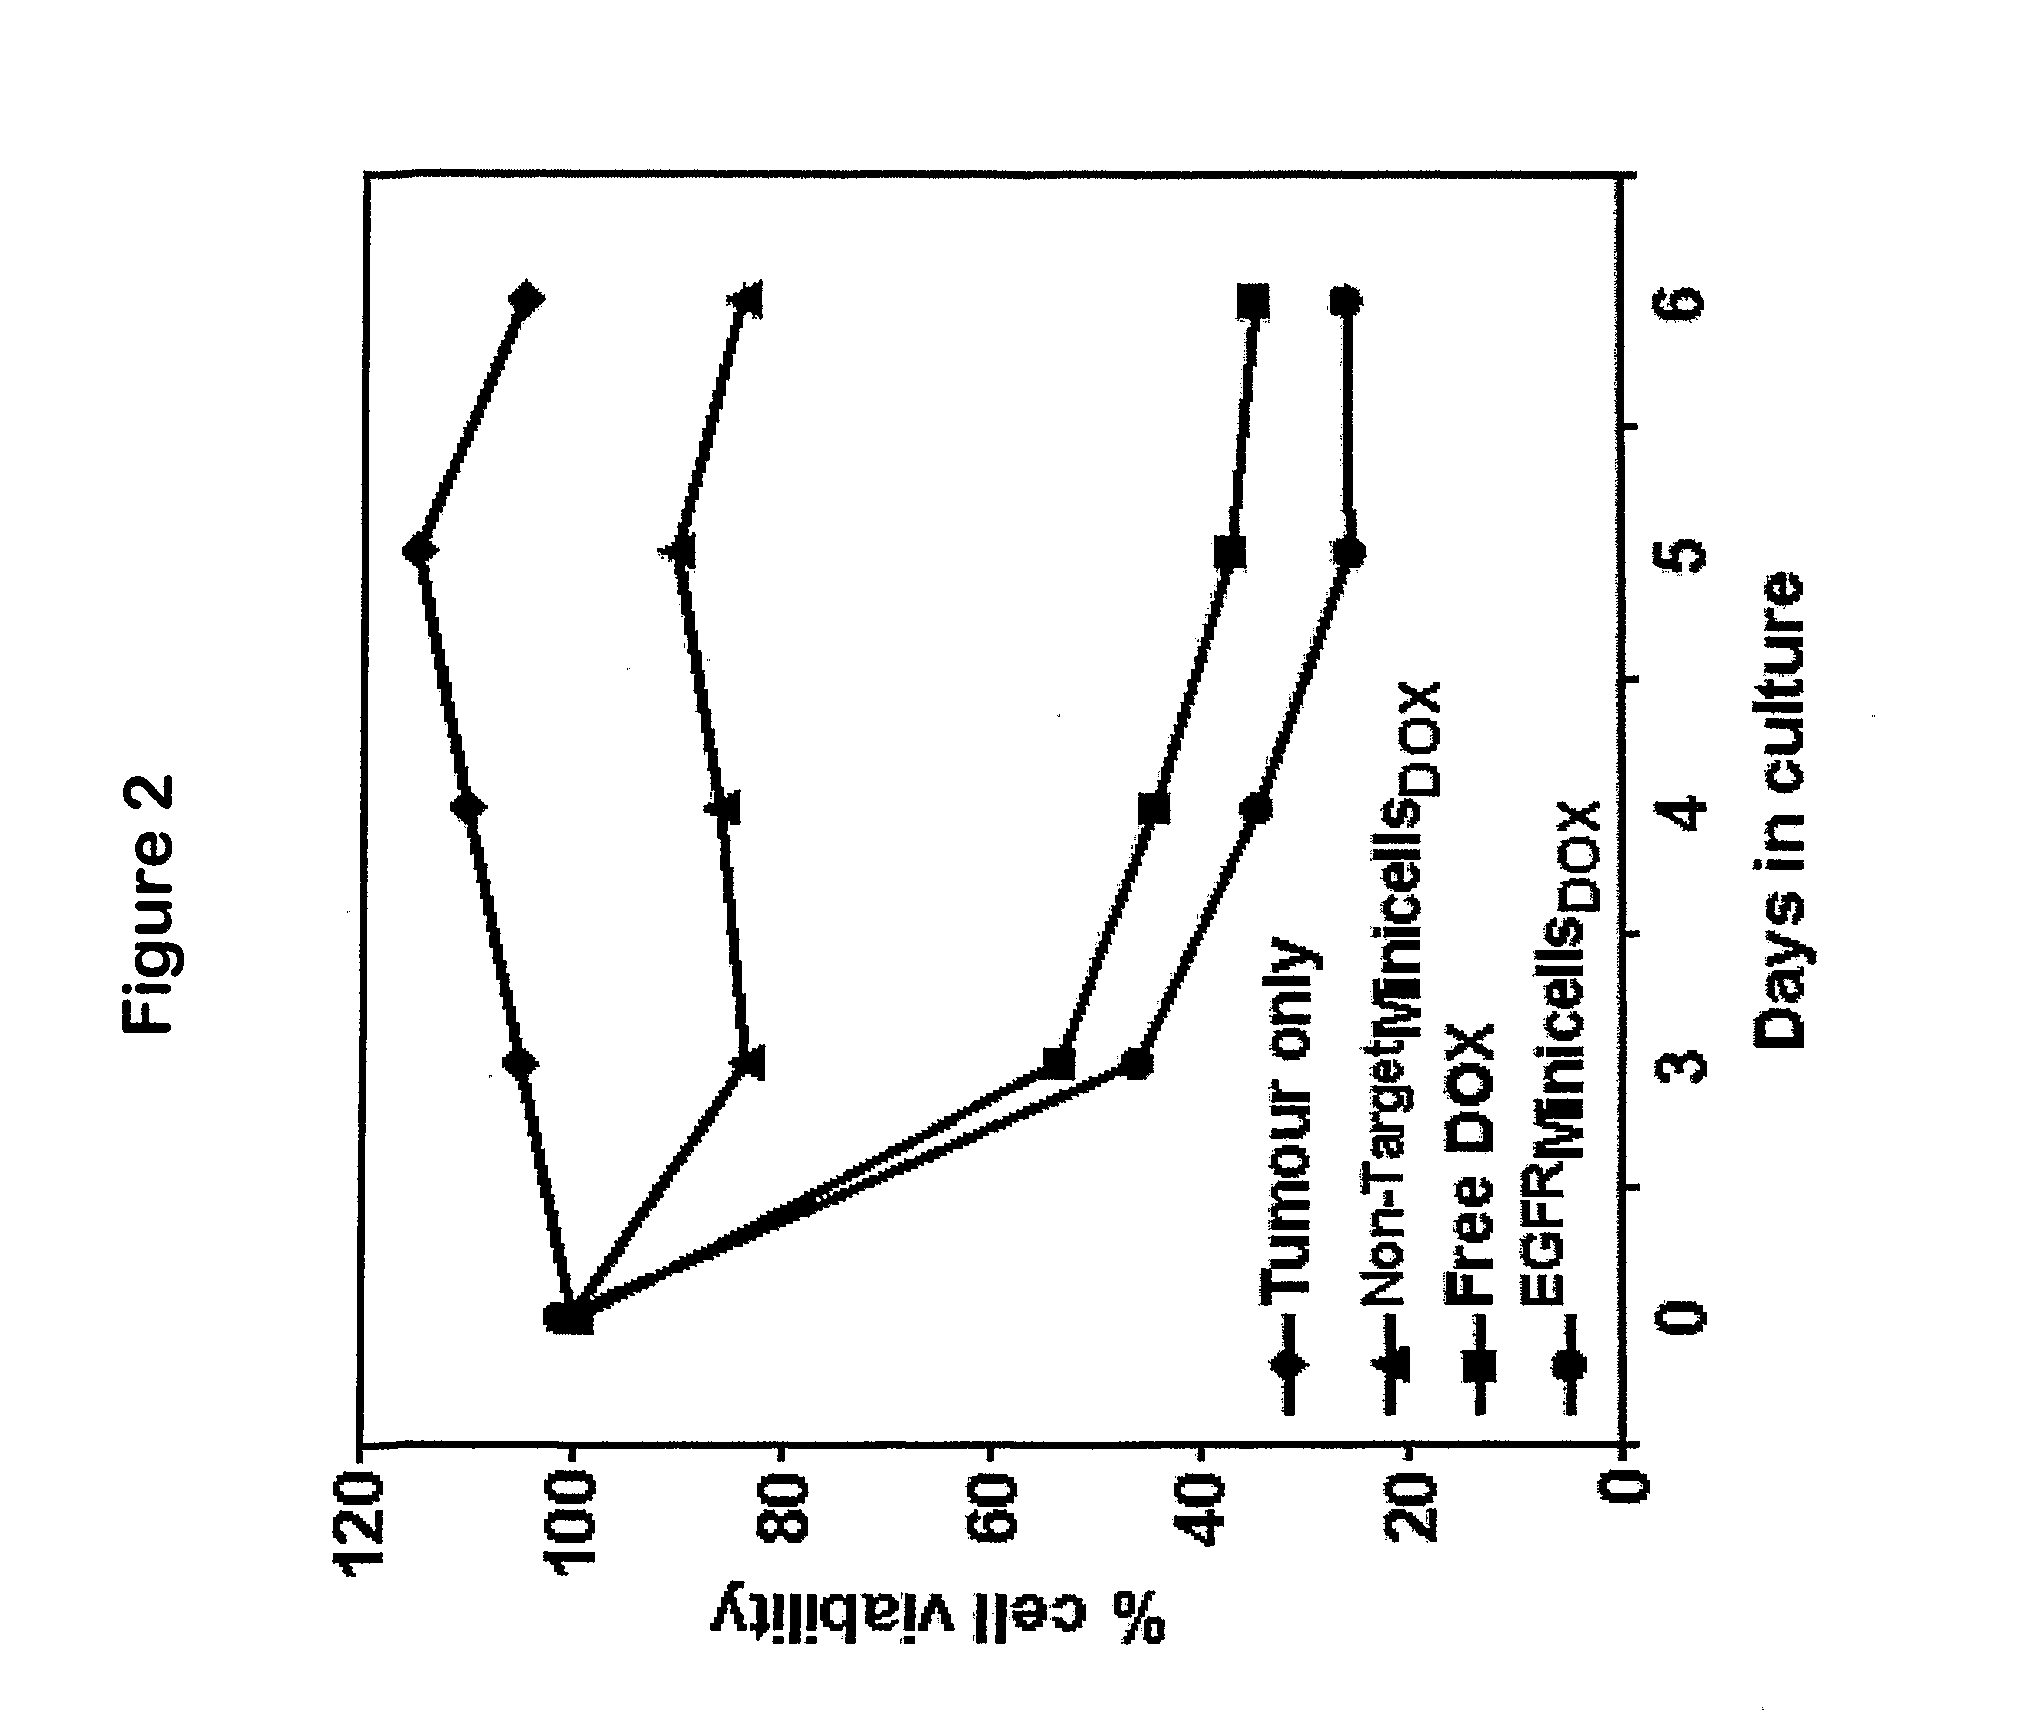 Methods for targeted in vitro and in vivo drug delivery to mammalian cells via bacterially derived intact minicells